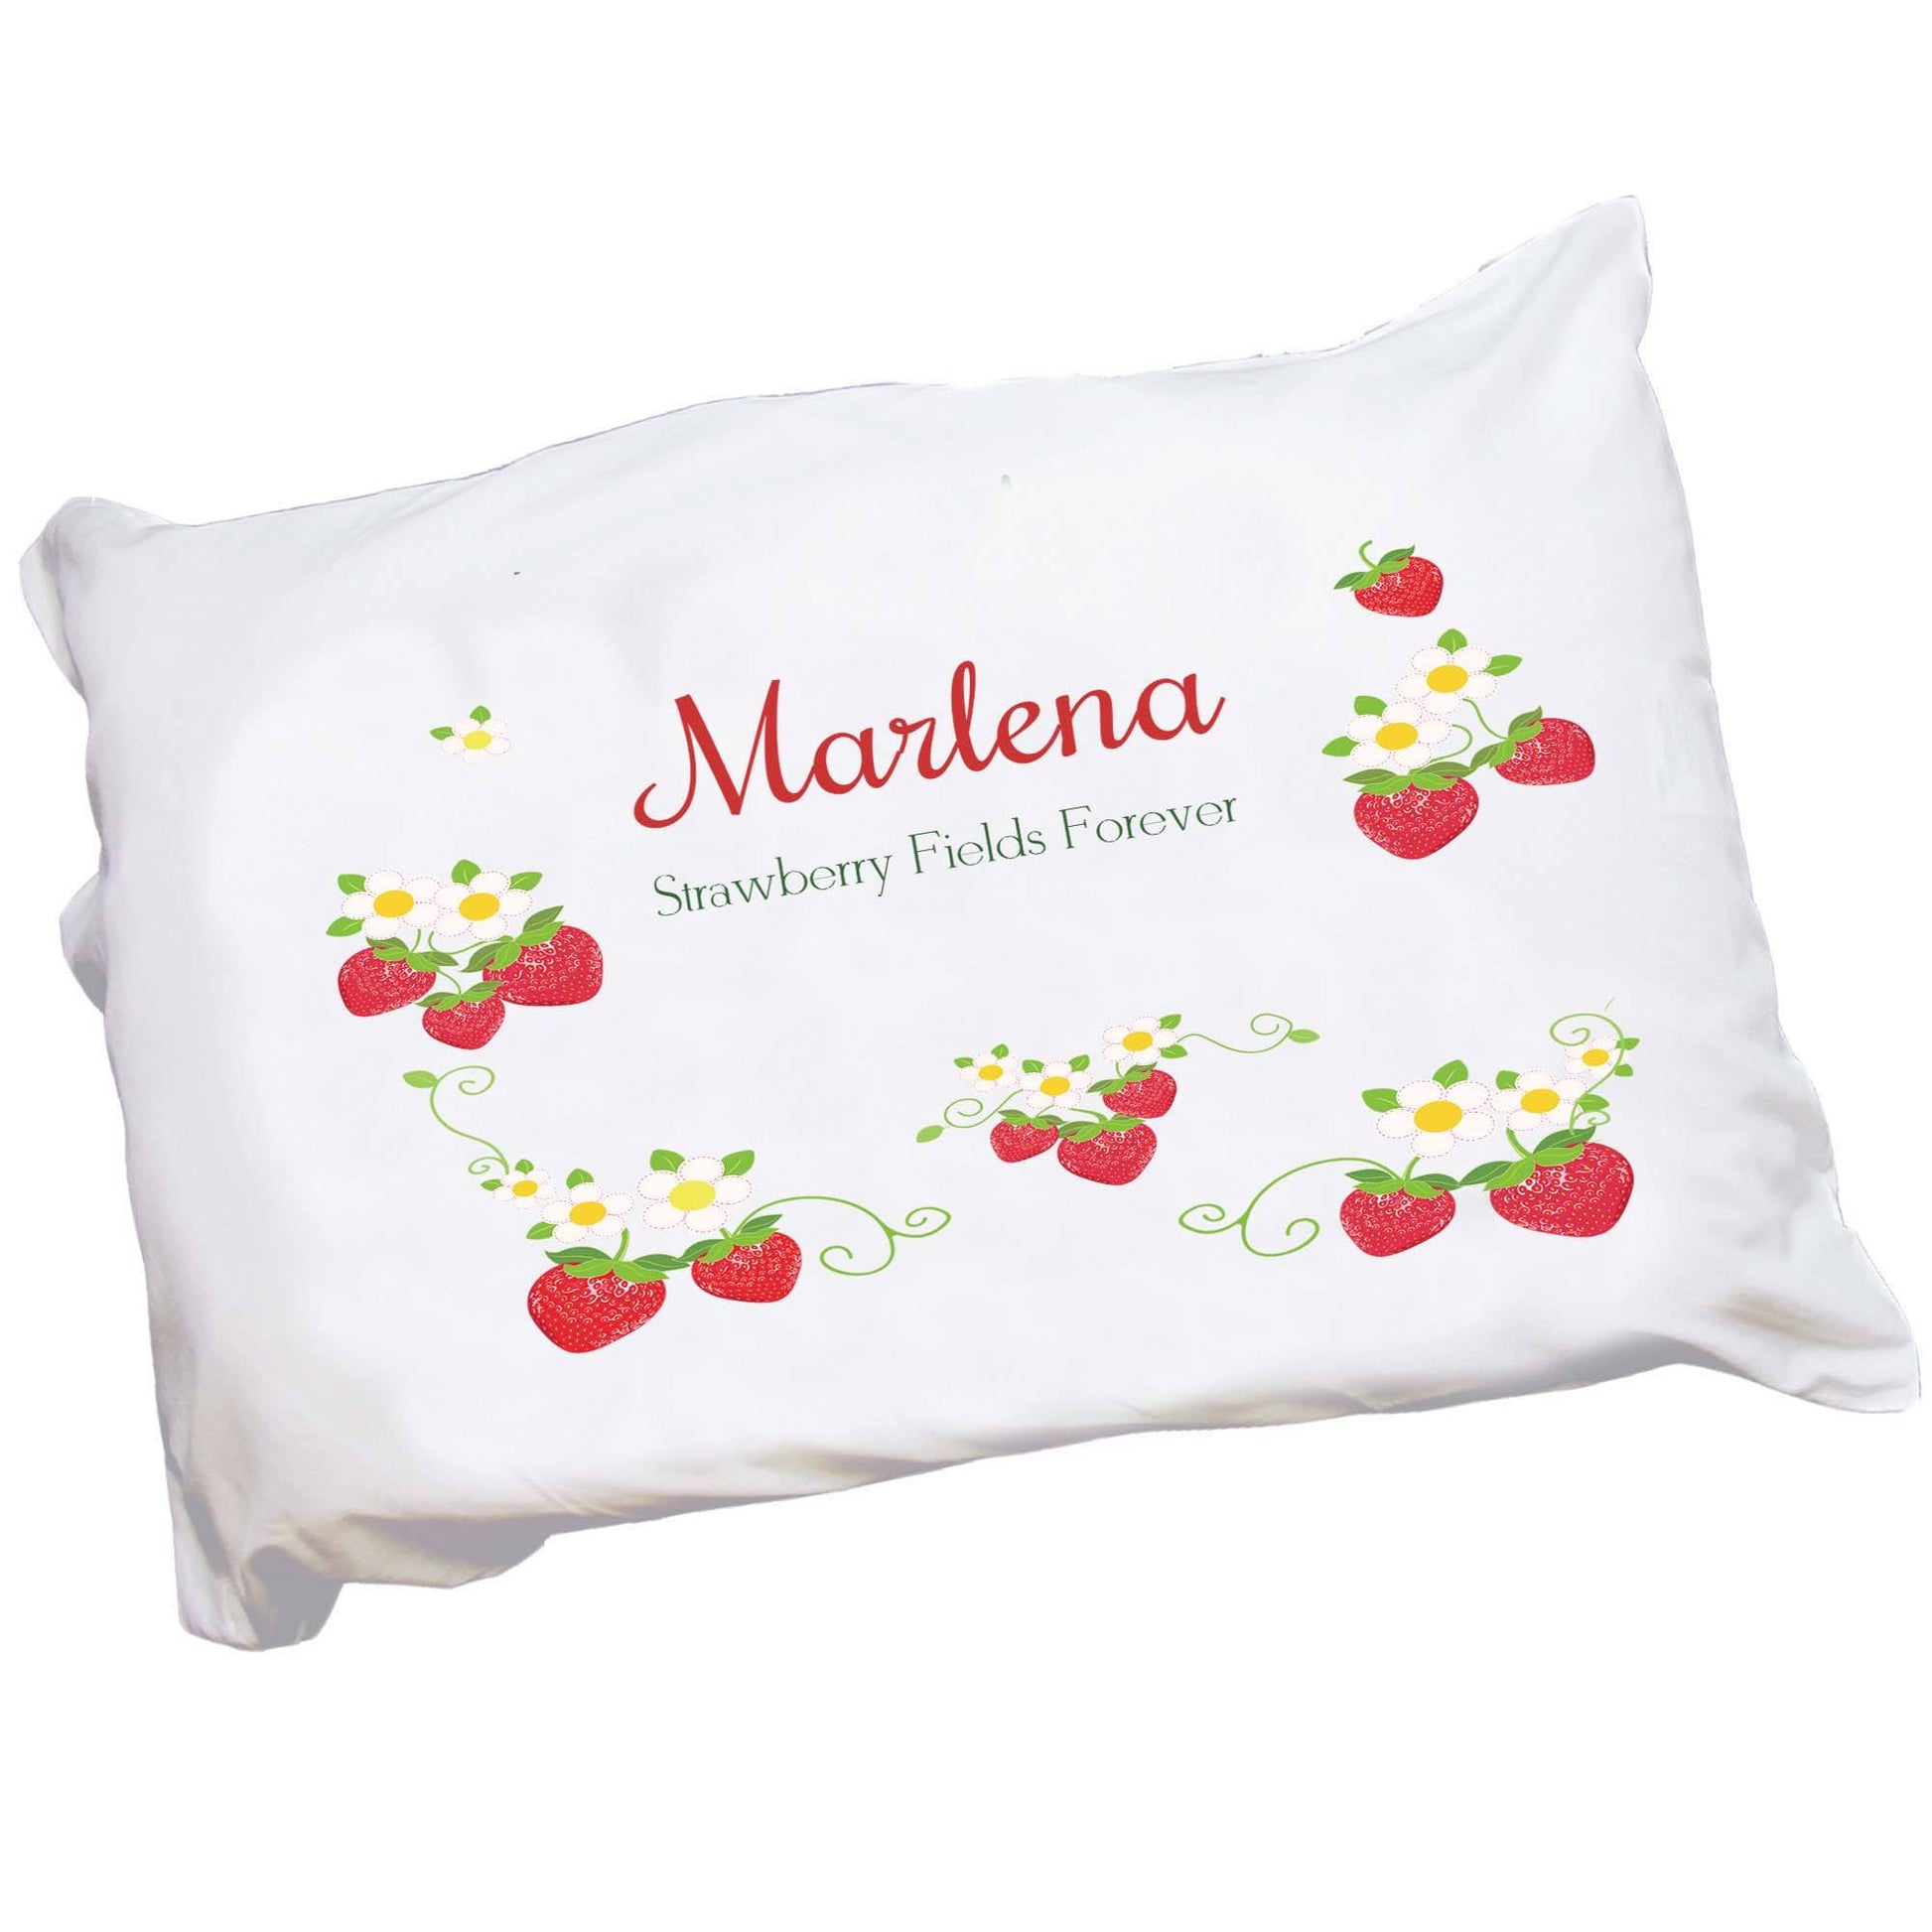 Personalized Childrens Pillowcase with Strawberries design